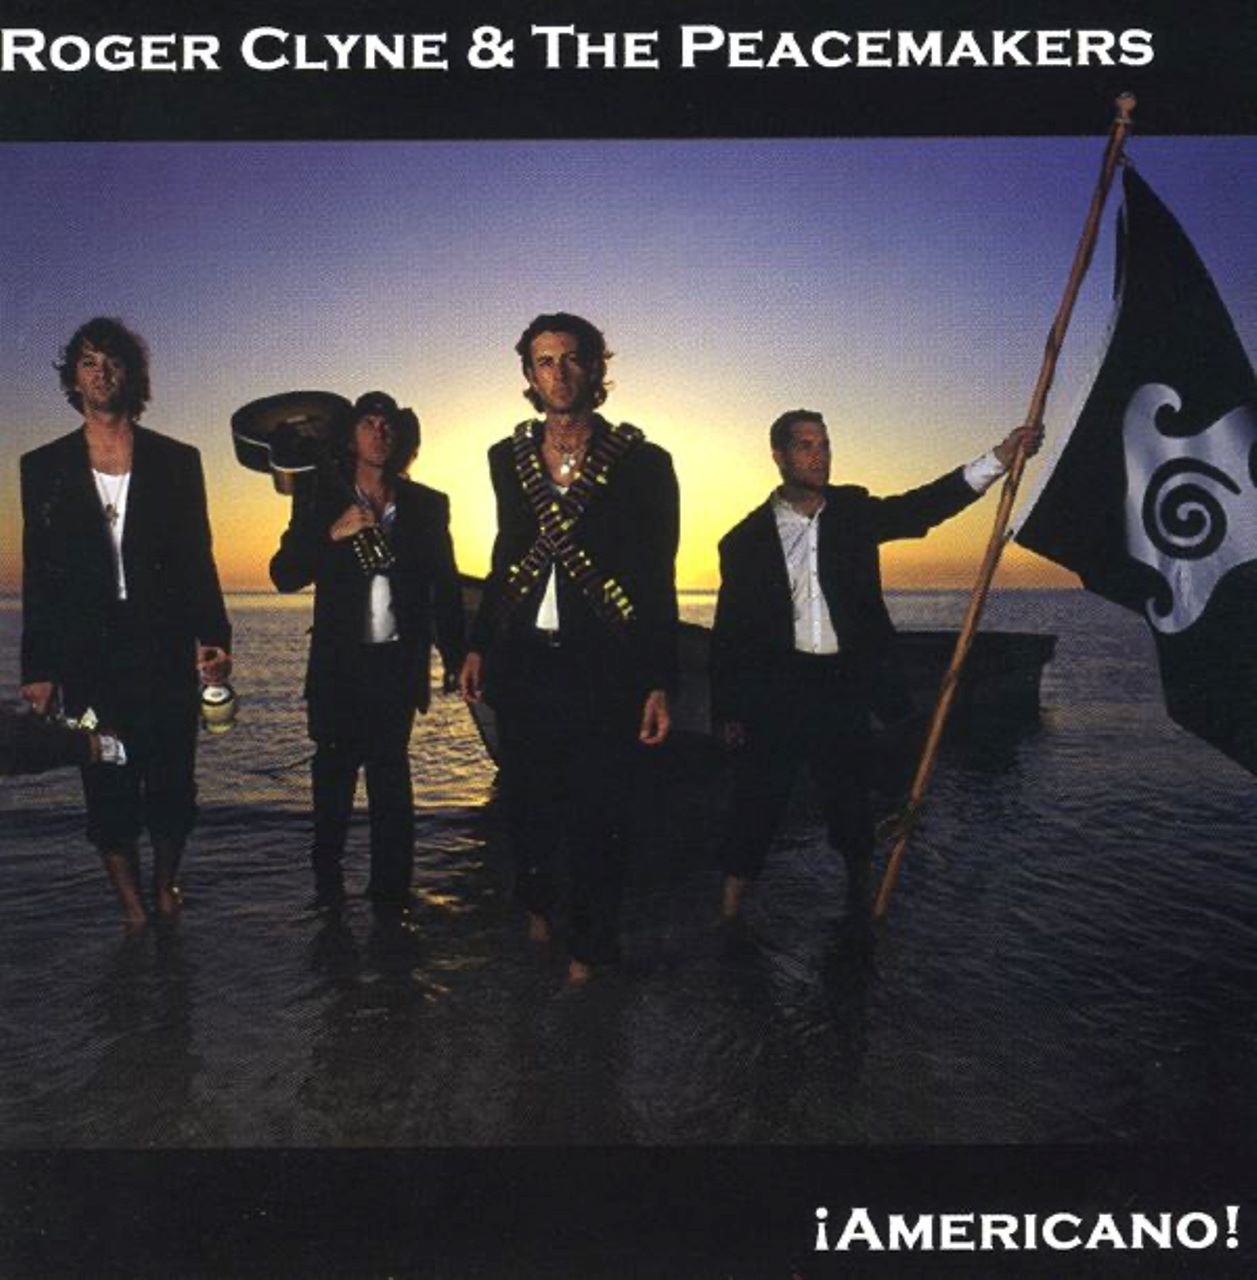 Roger Clyne & The Peacemakers - Americano! cover album